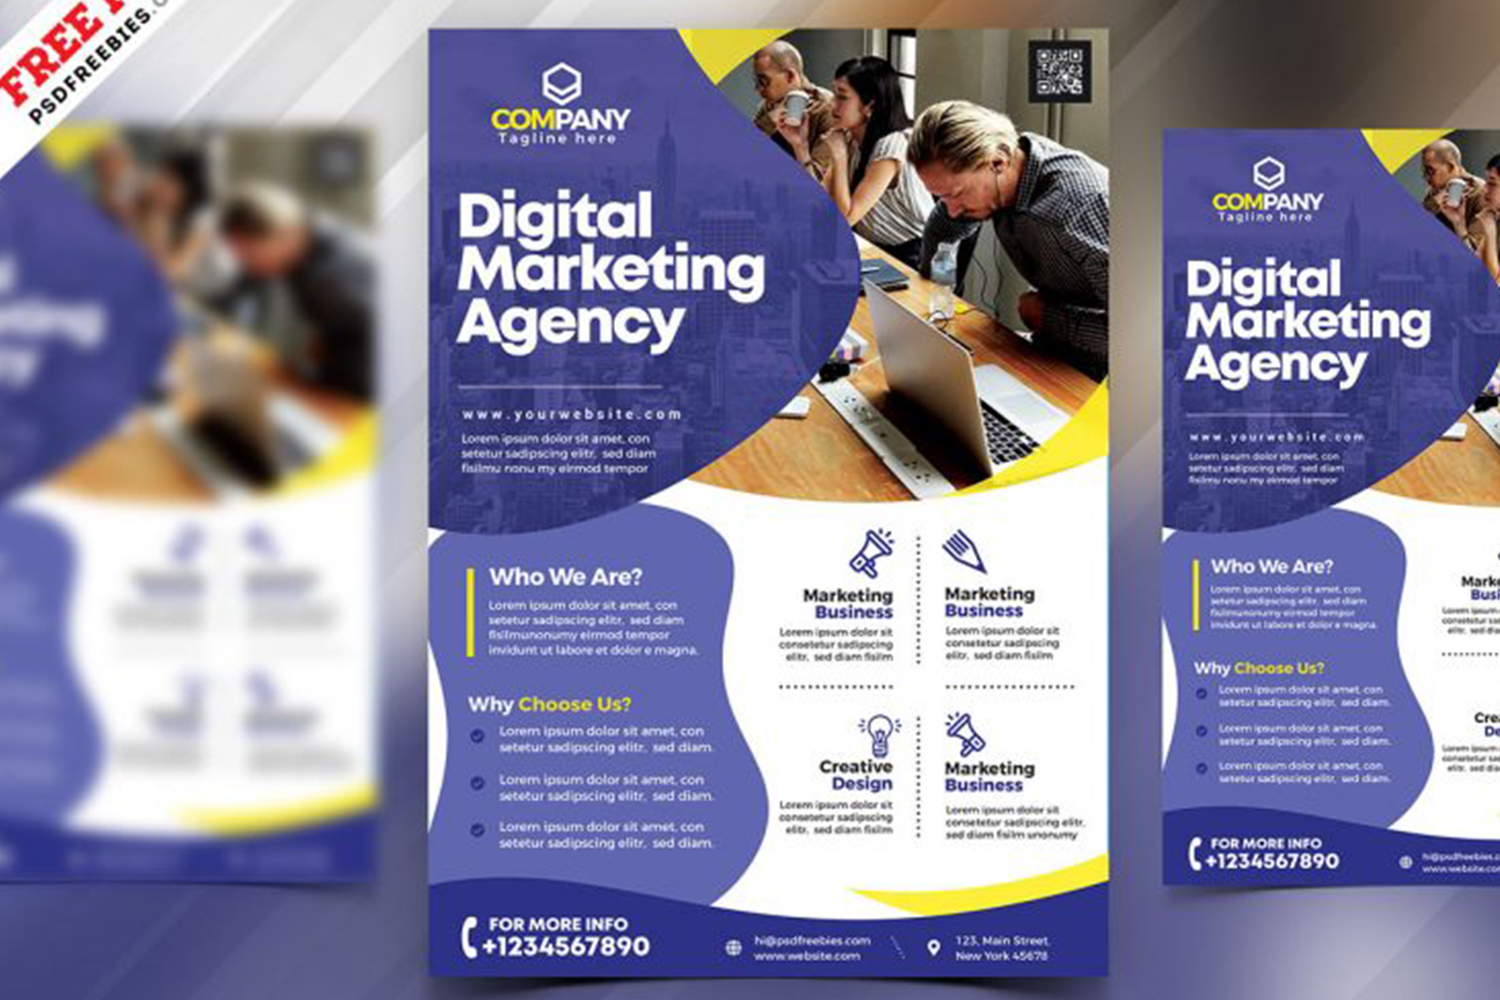 Marketing Agency Promotion Flyer PSD Free Download